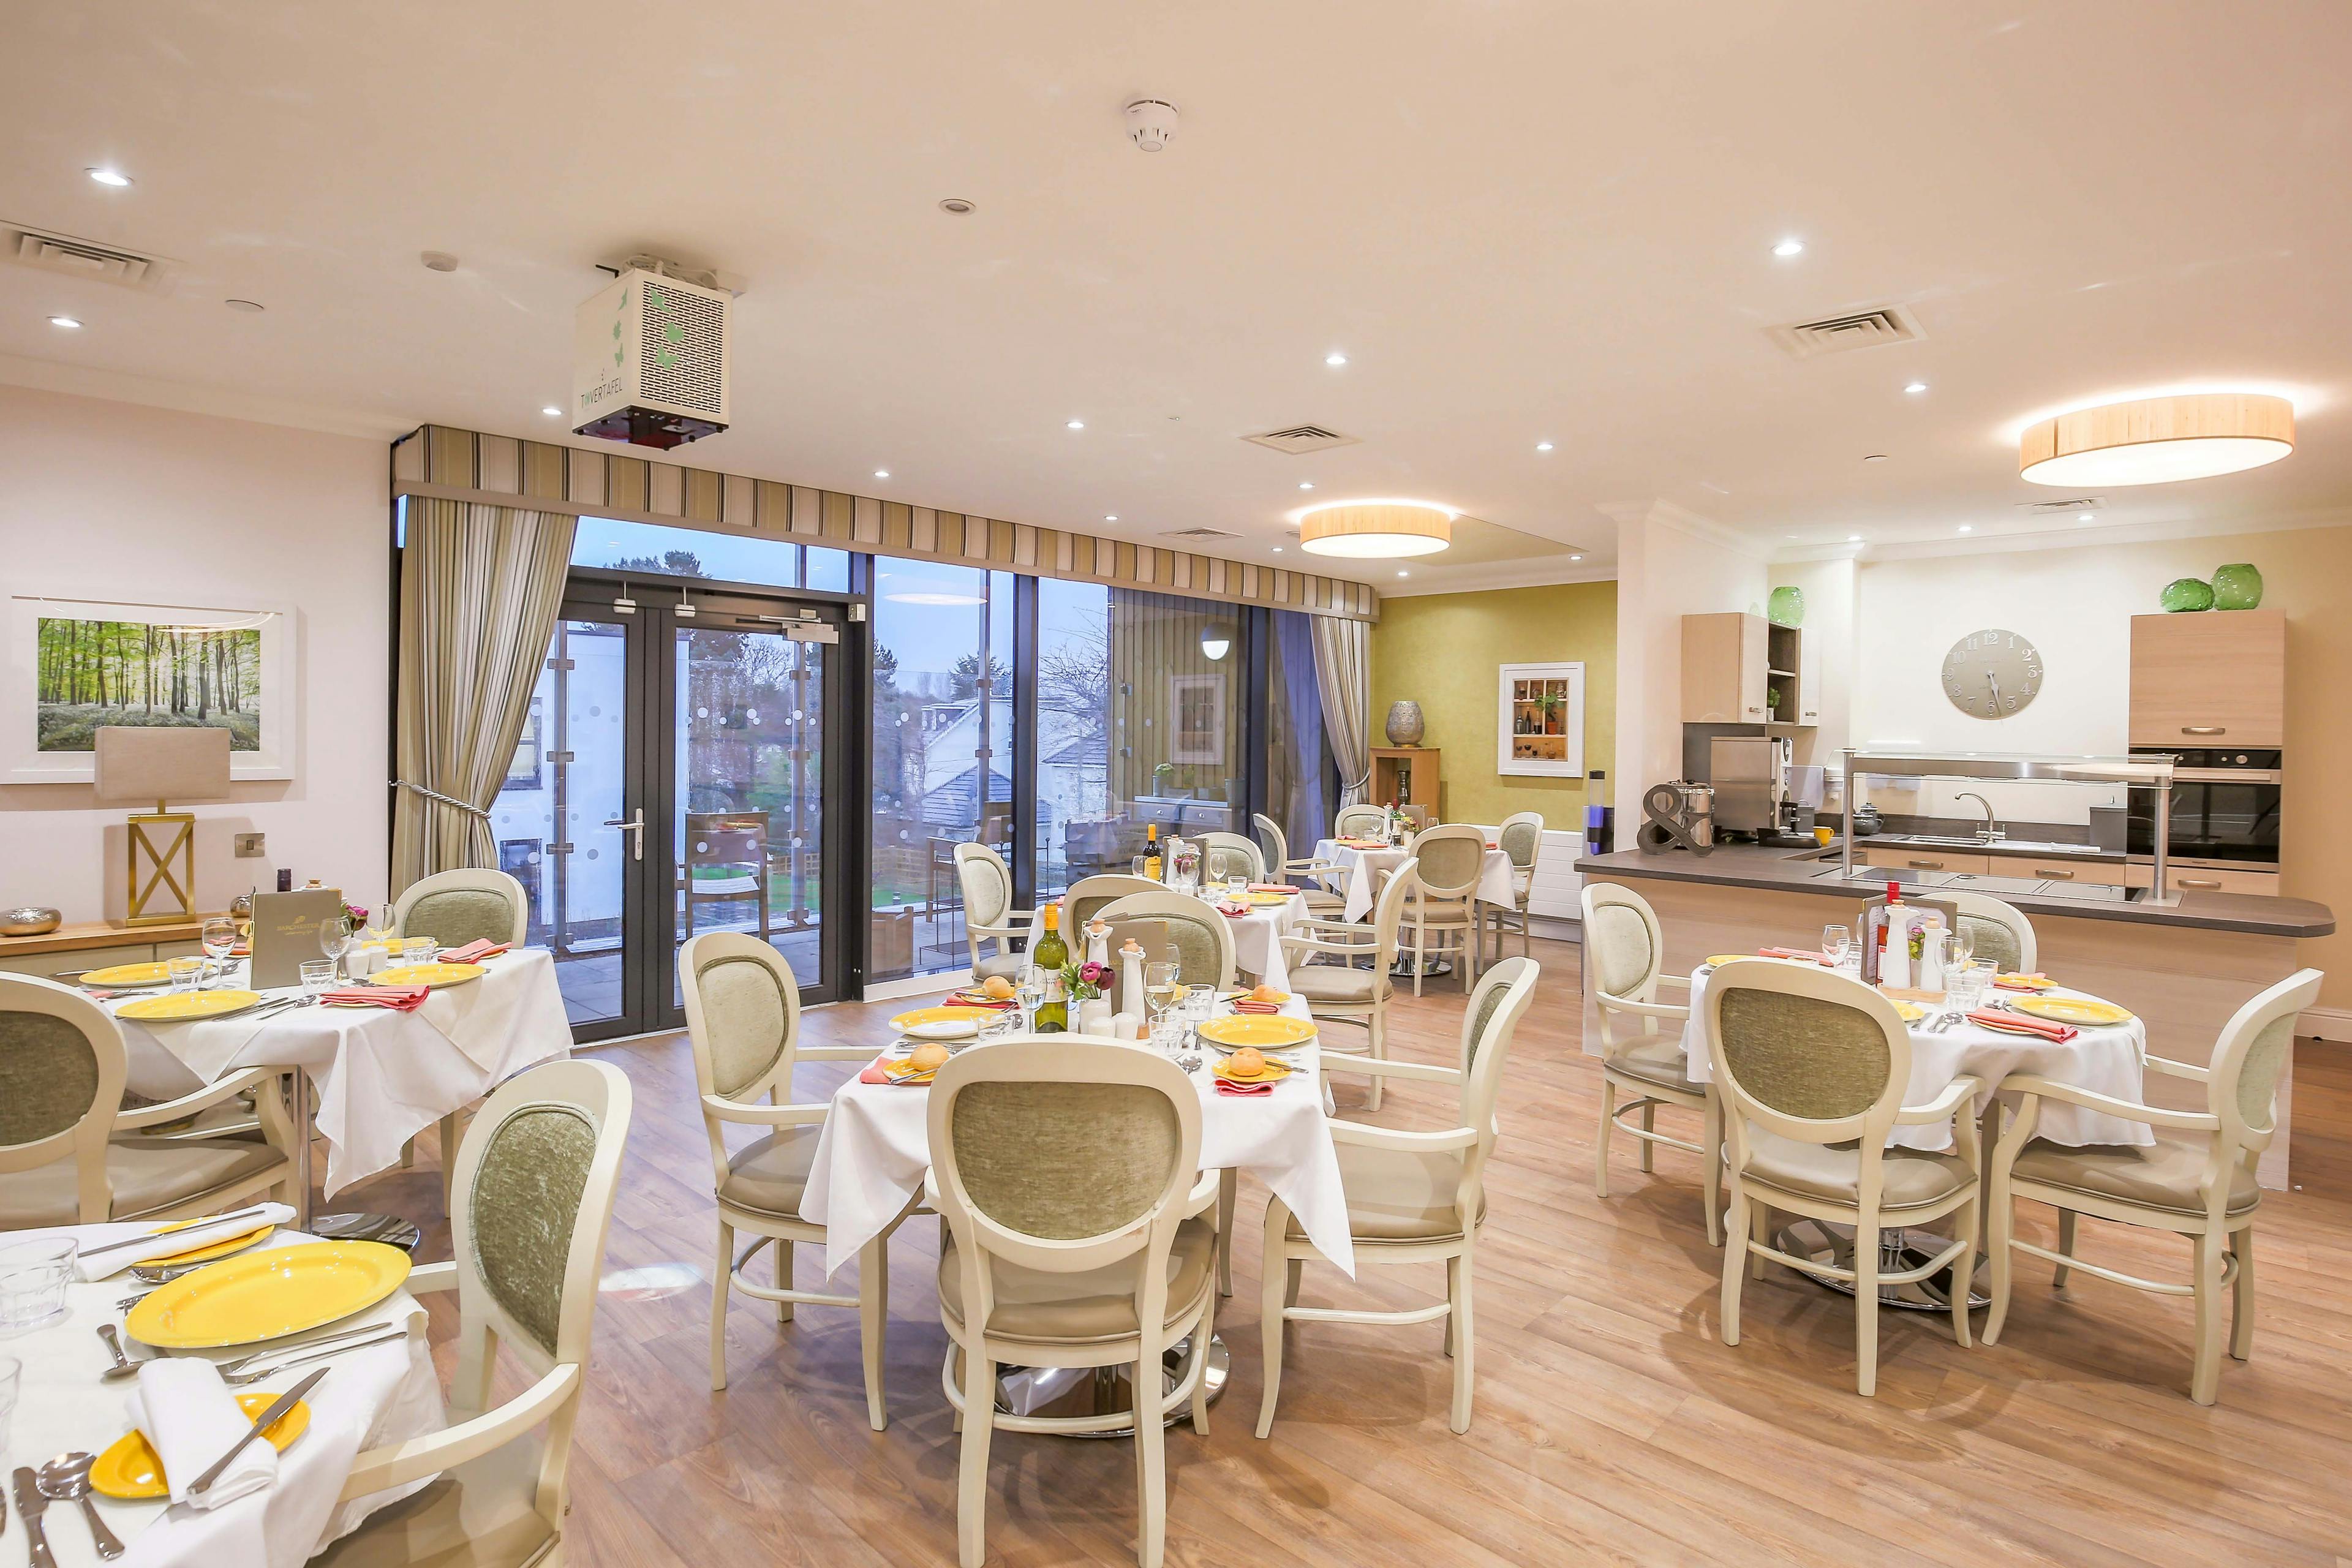 Dining Room at Queens Manor Care Home in Edinburgh, Scotland